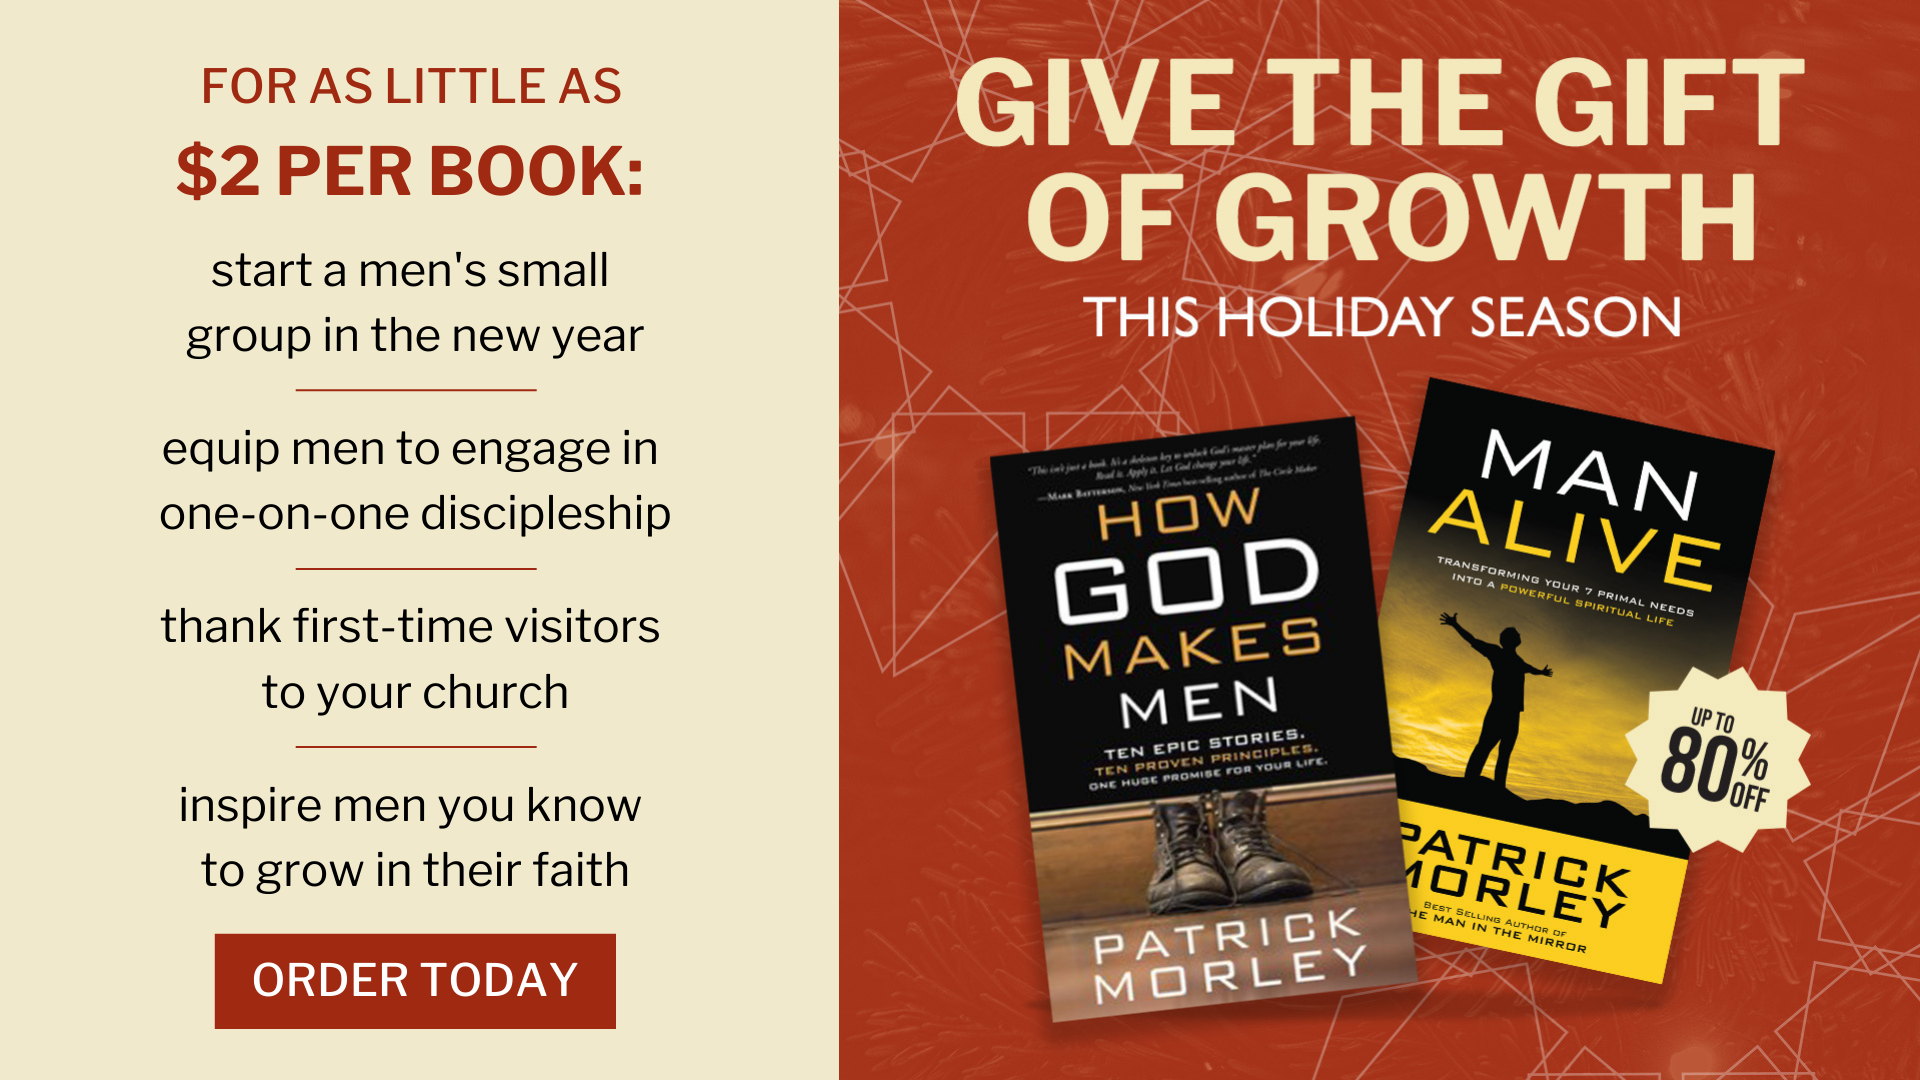 Discounted Christian books for men by Patrick Morley